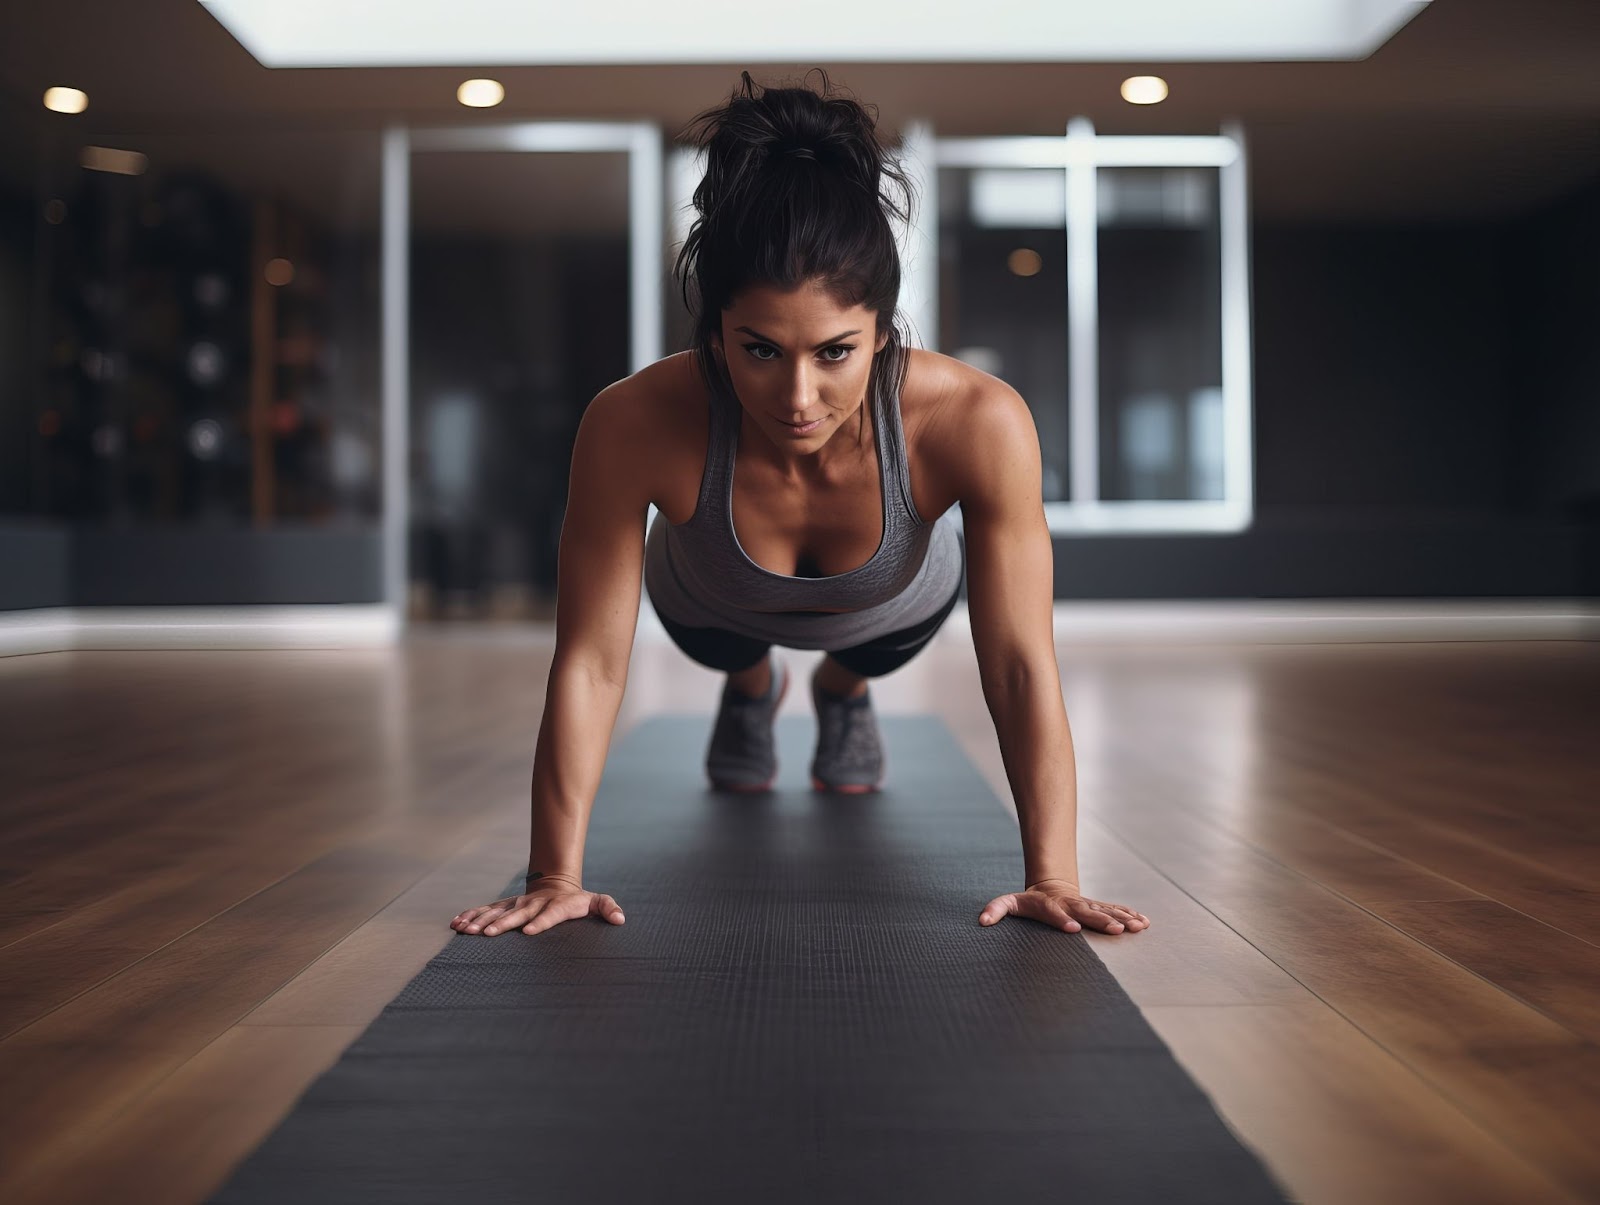 Fit young woman doing a push up in an empty gym